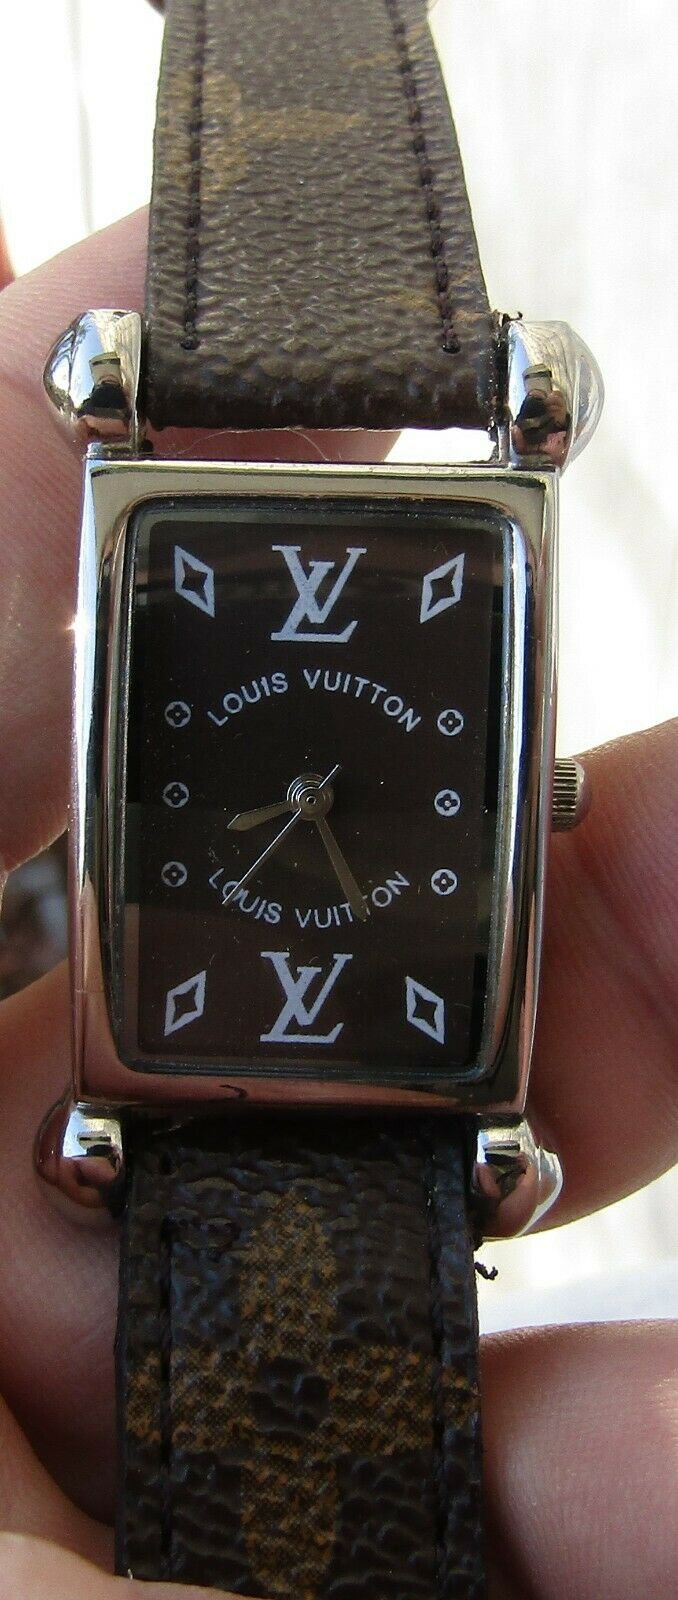 Estate+Louis+Vuitton+Ladies+Wrist+Watch+1187hs2003l+Leather+Band+Untested  for sale online